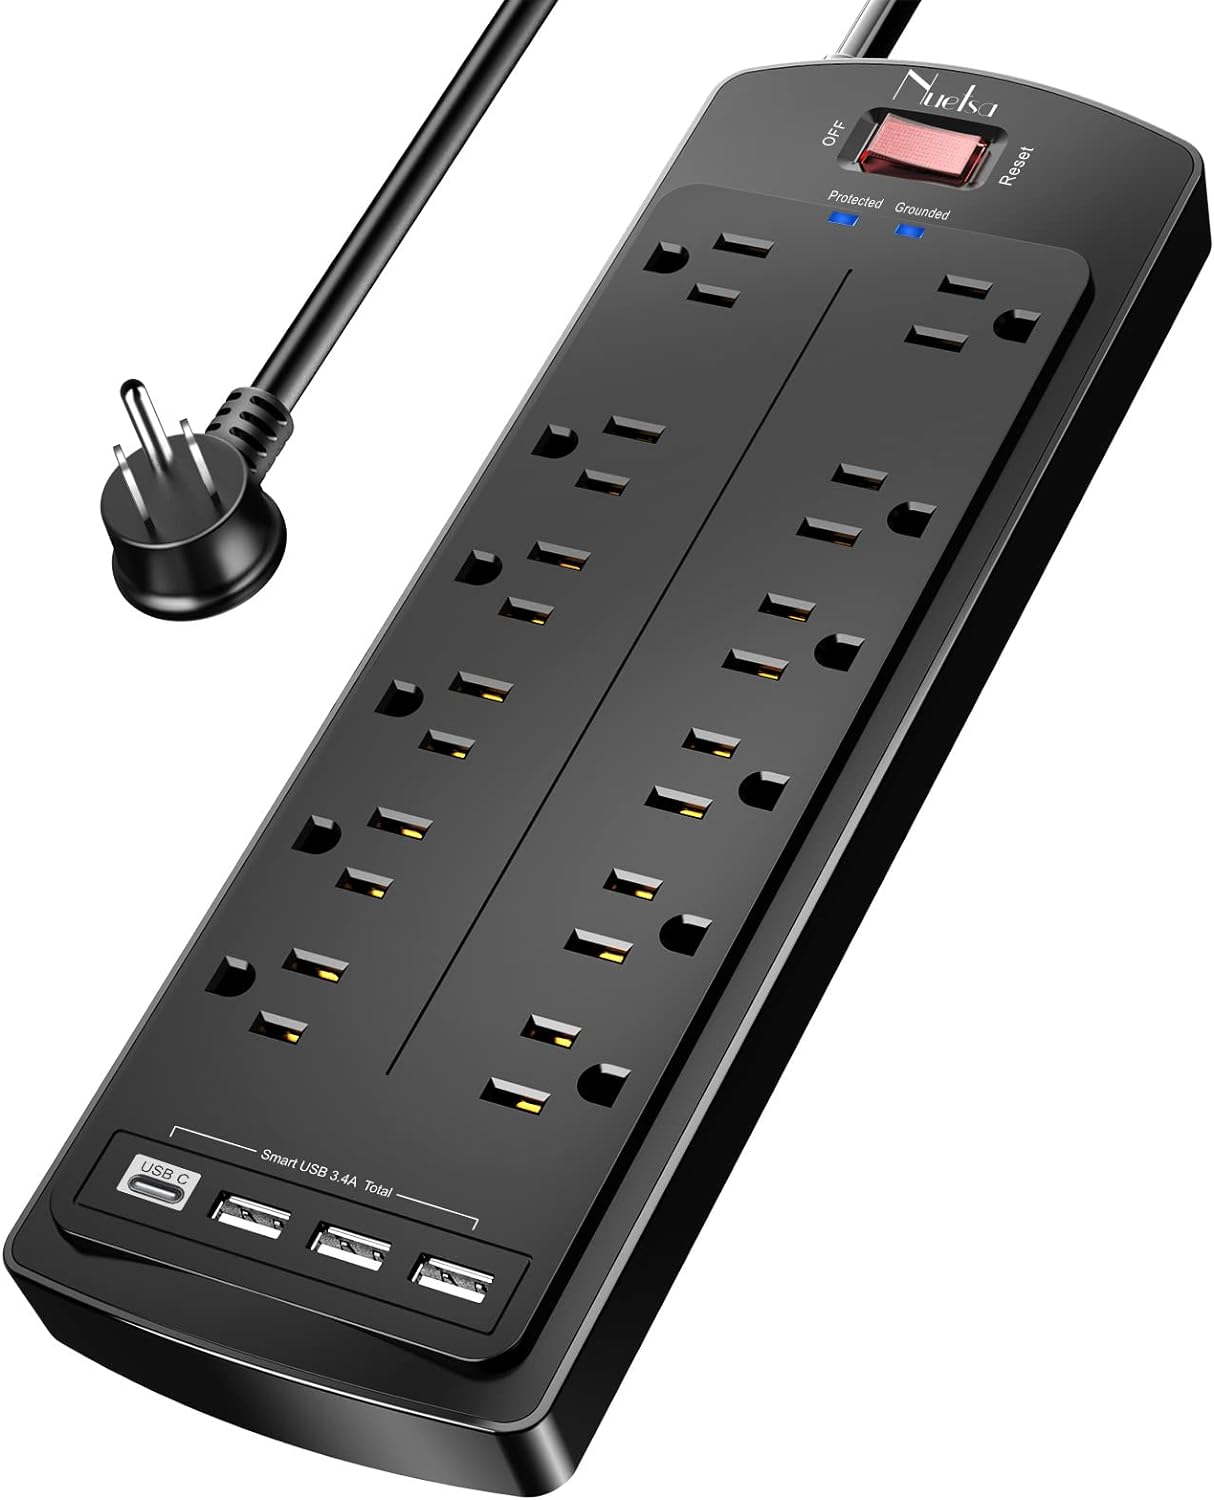 I bought one of these power strips for every room in my house, except the bathroom. I love them. There are many plug ins and places to charge a phone. I would definitely buy again